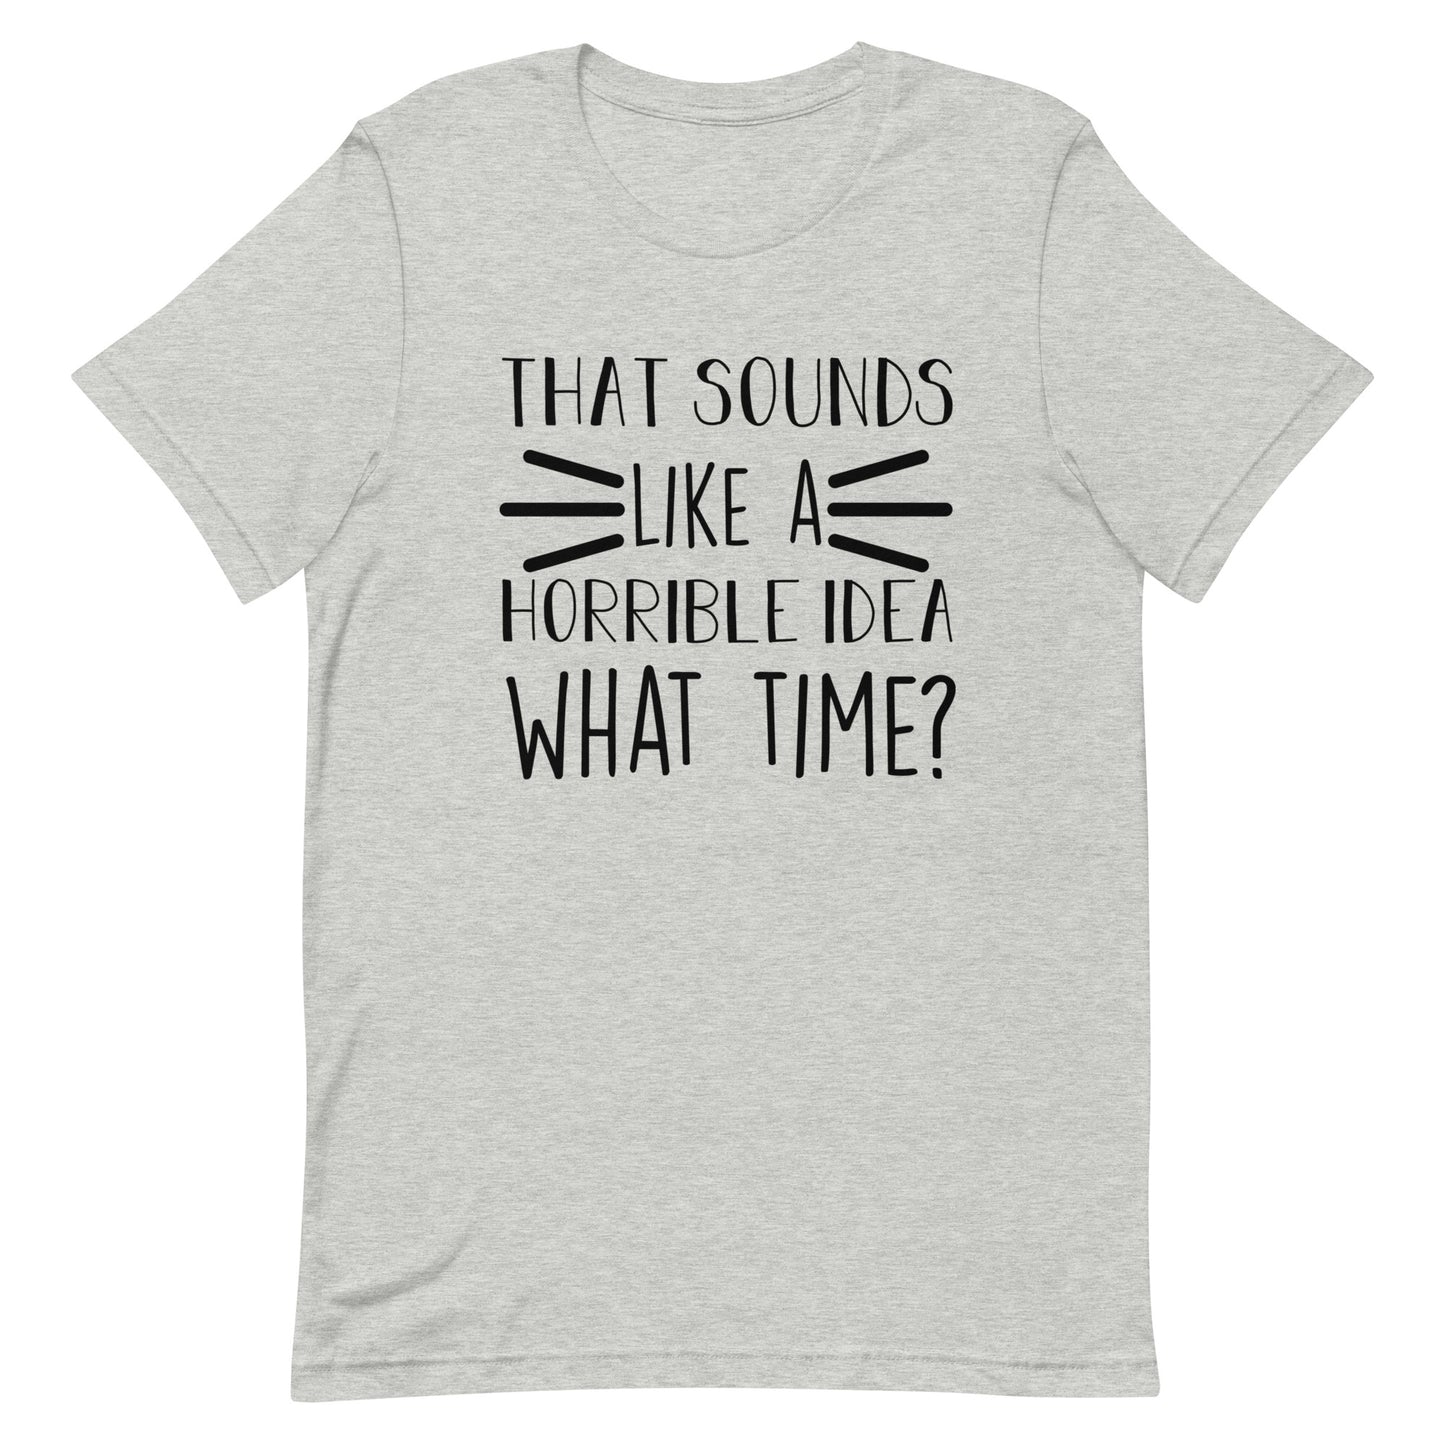 That Sounds Like a Horrible Idea What Time? Unisex t-shirt